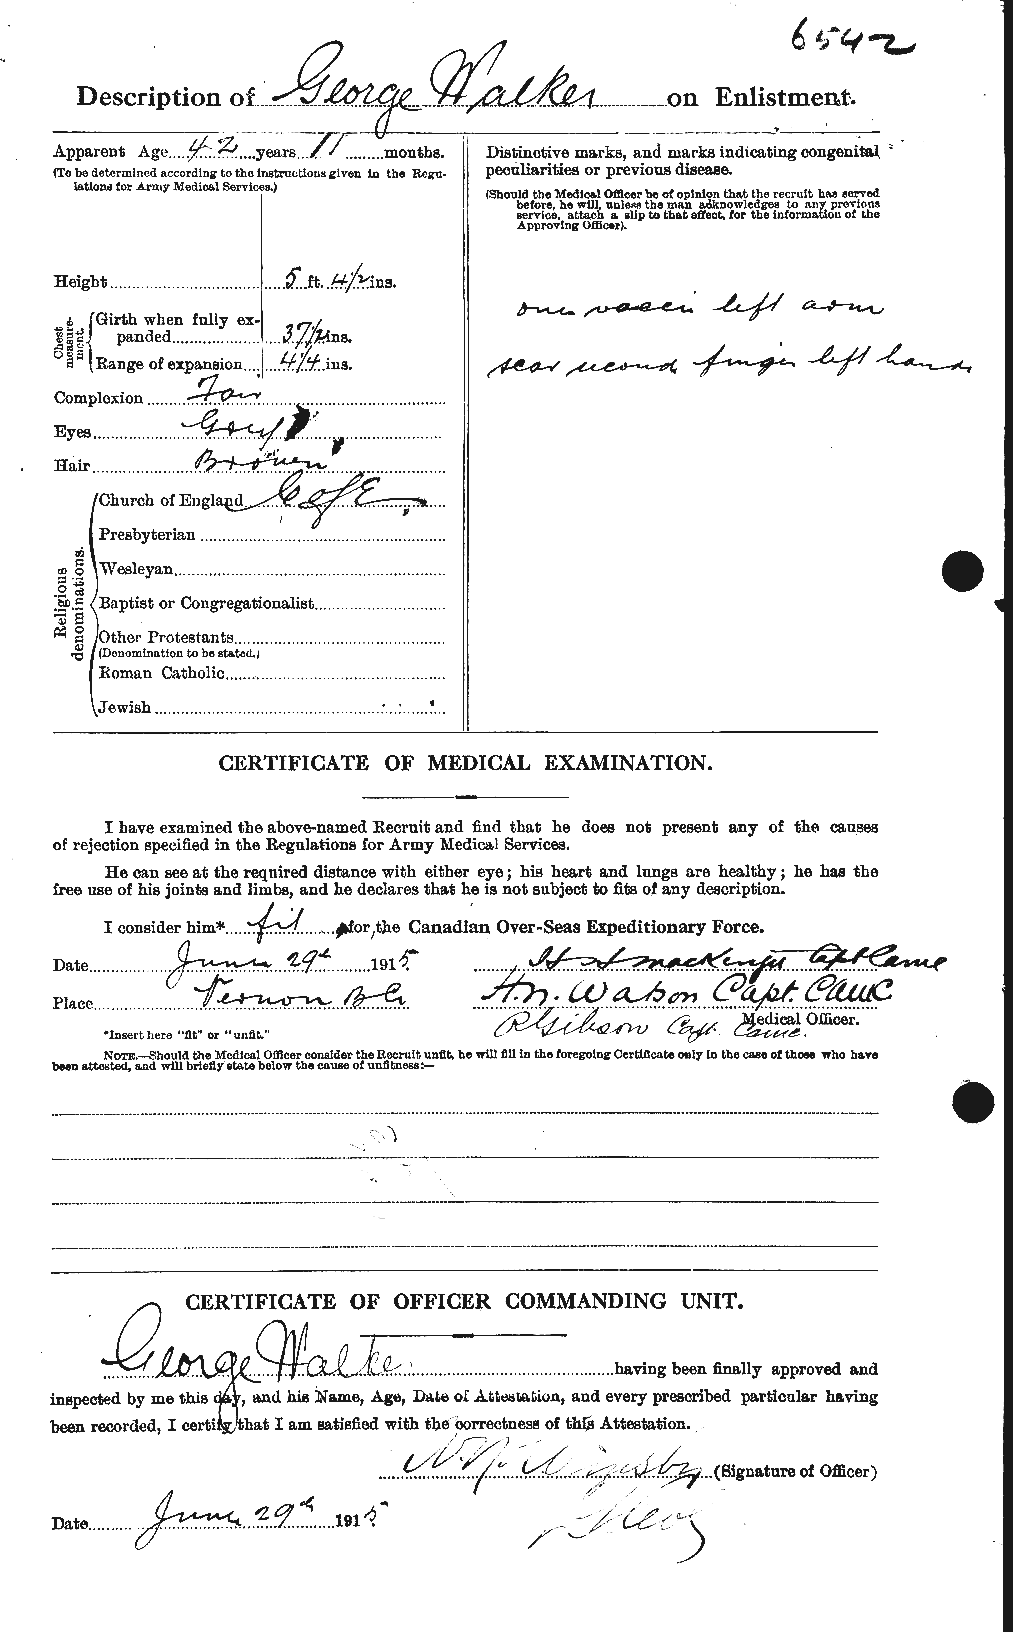 Personnel Records of the First World War - CEF 651922b